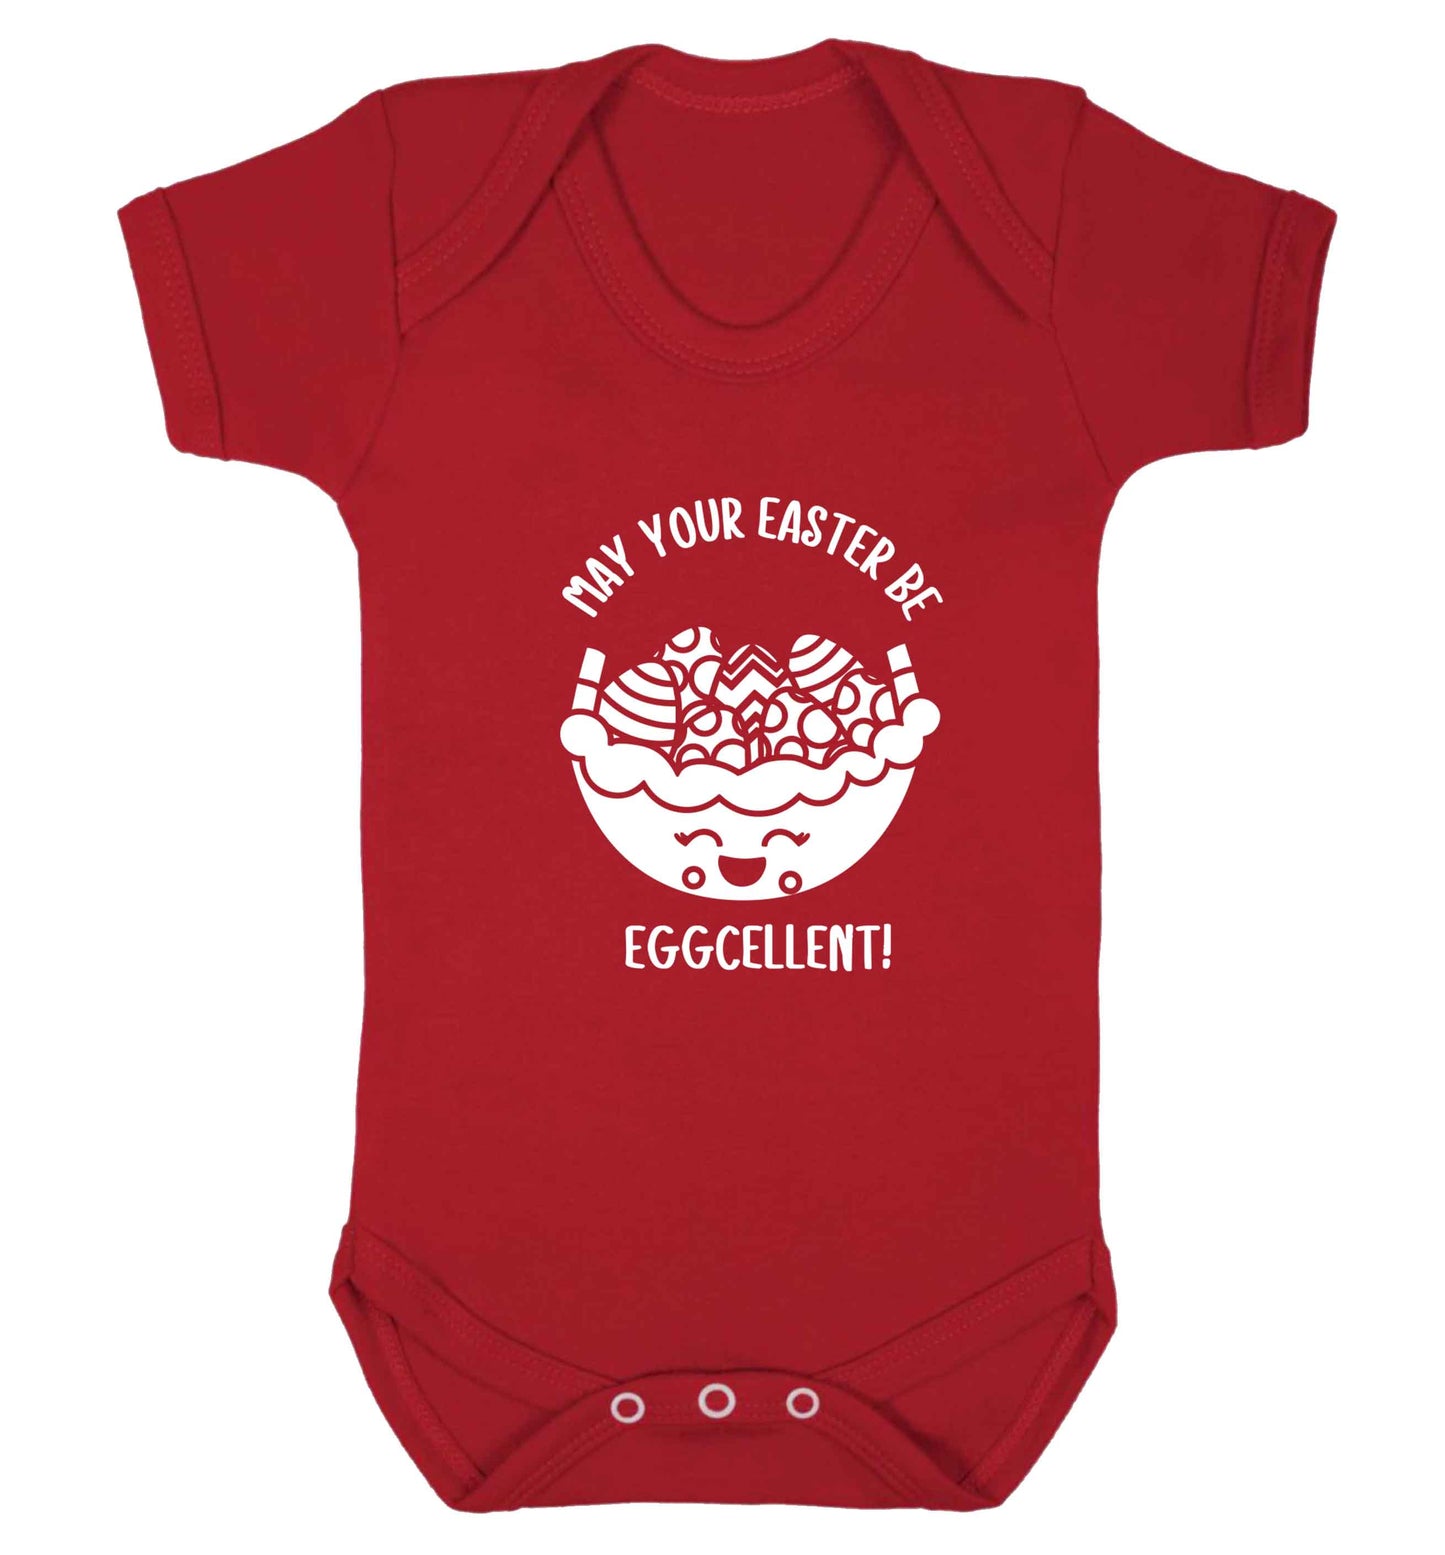 May your Easter be eggcellent baby vest red 18-24 months